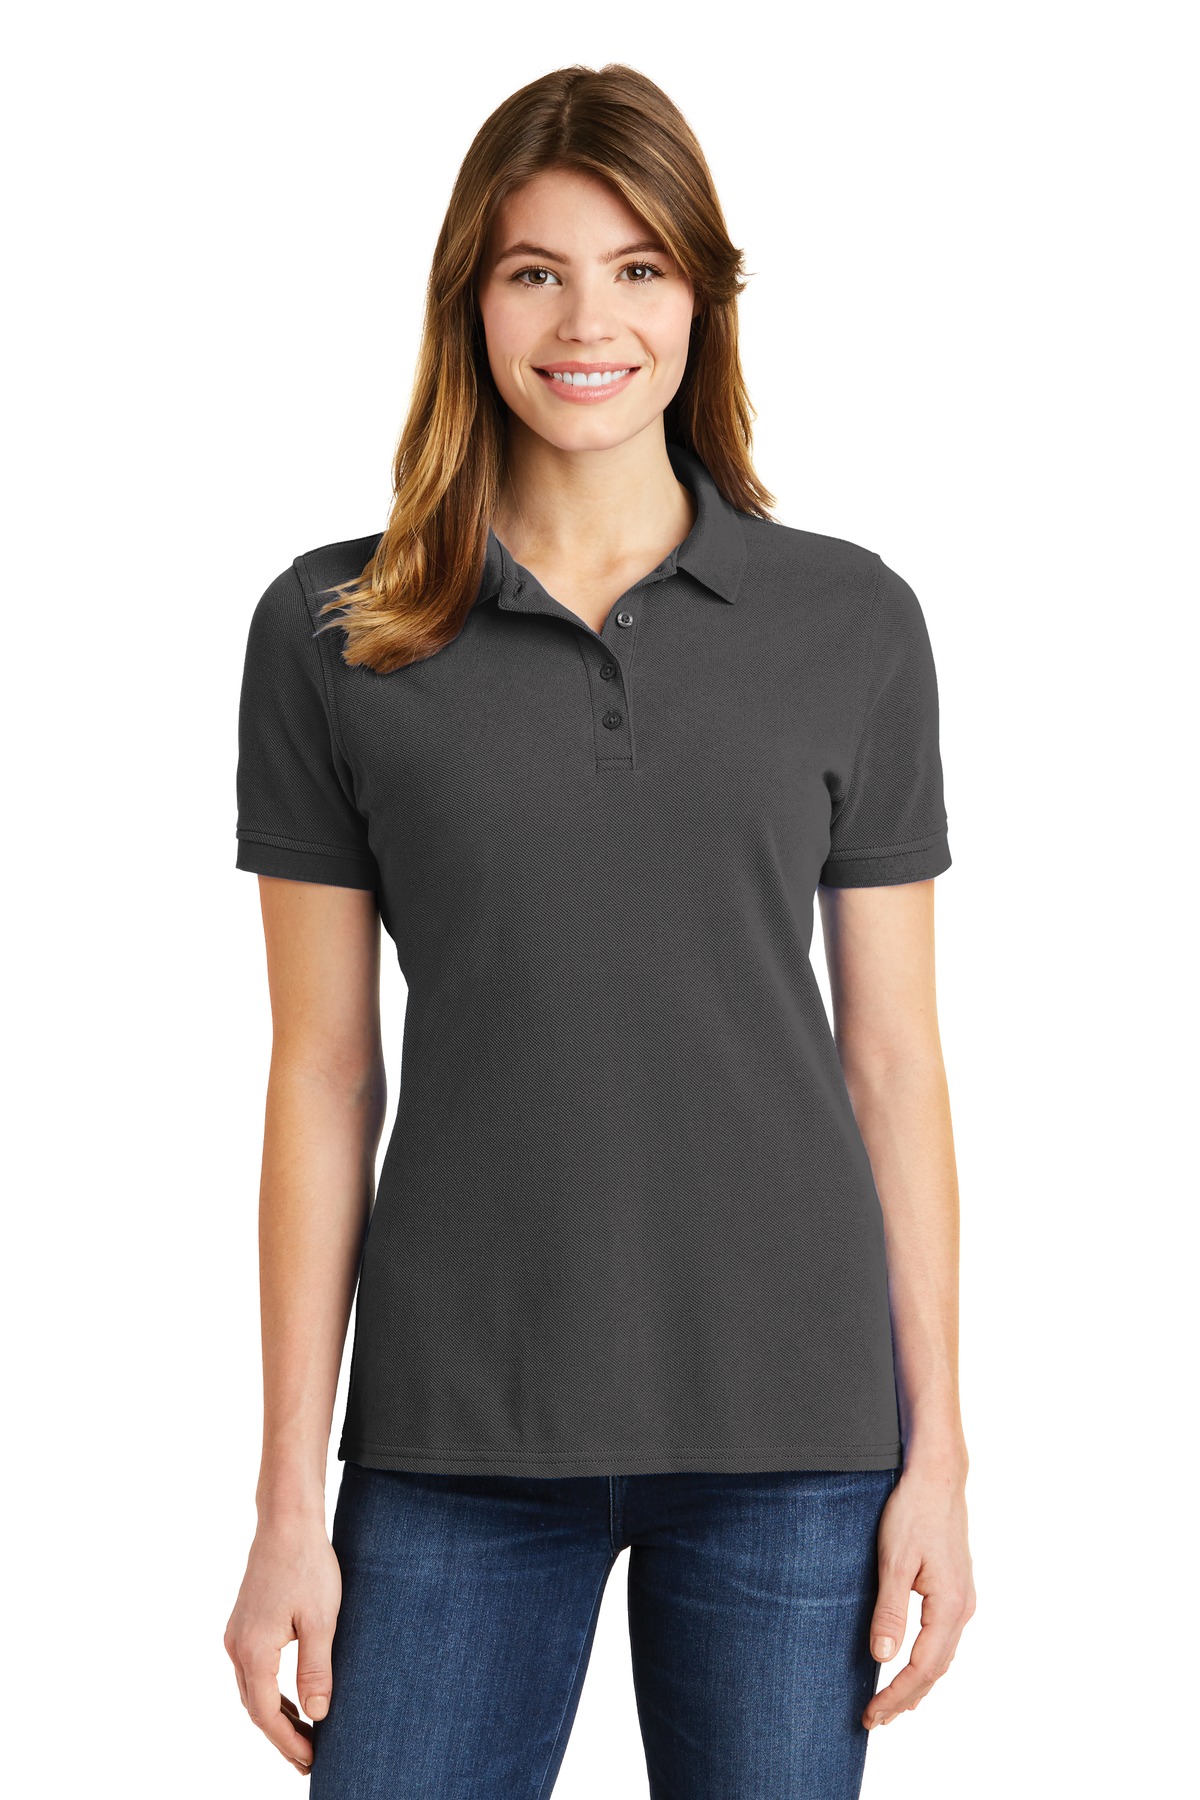 Port & Company Ladies Hospitality Polos & Knits ® Ladies Combed Ring Spun Pique Polo.-Port & Company